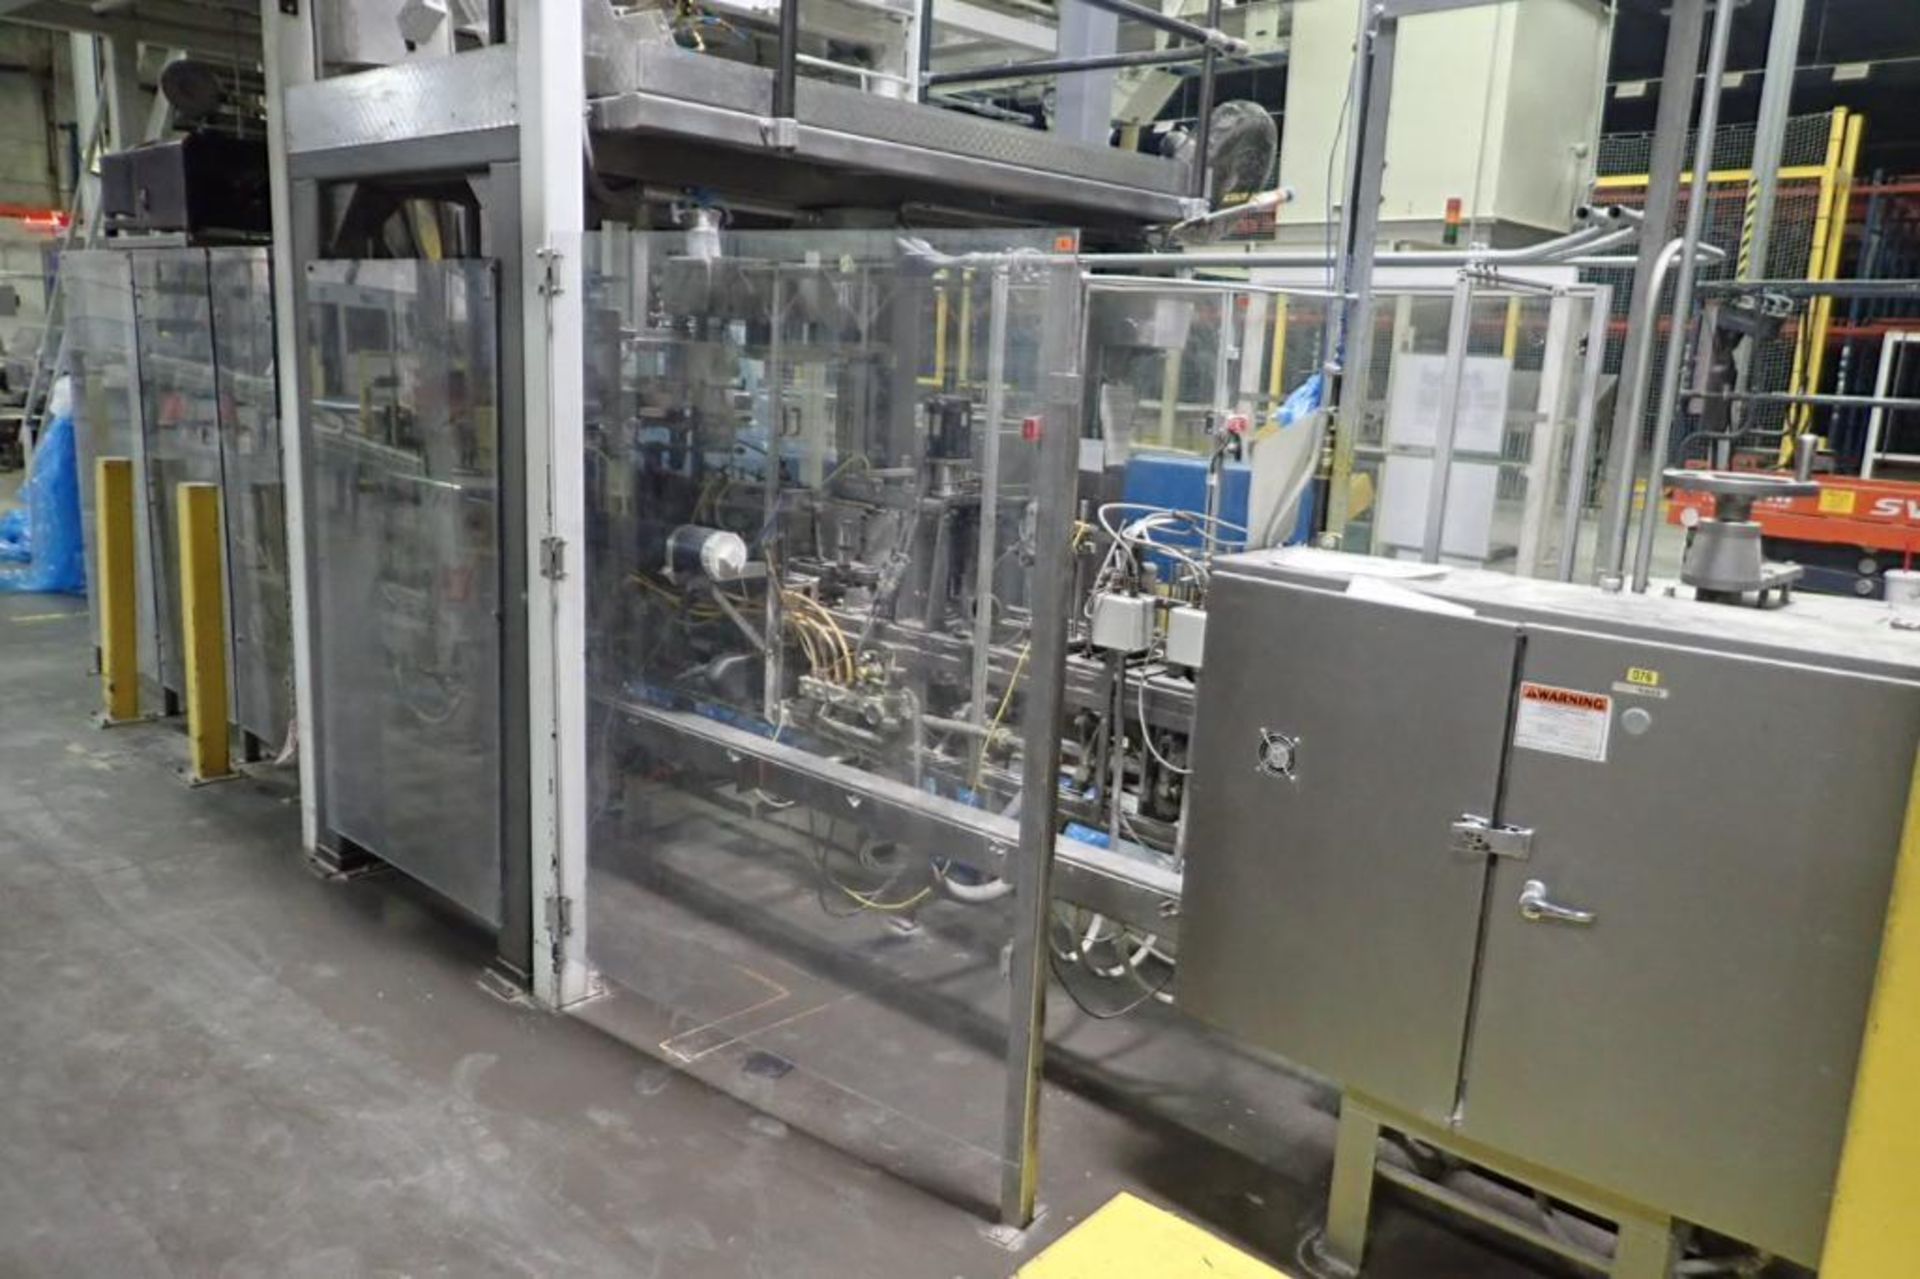 Bartelt horizontal bag former with filling sections, Allen-Bradley panelview plus 700, possible SN 7